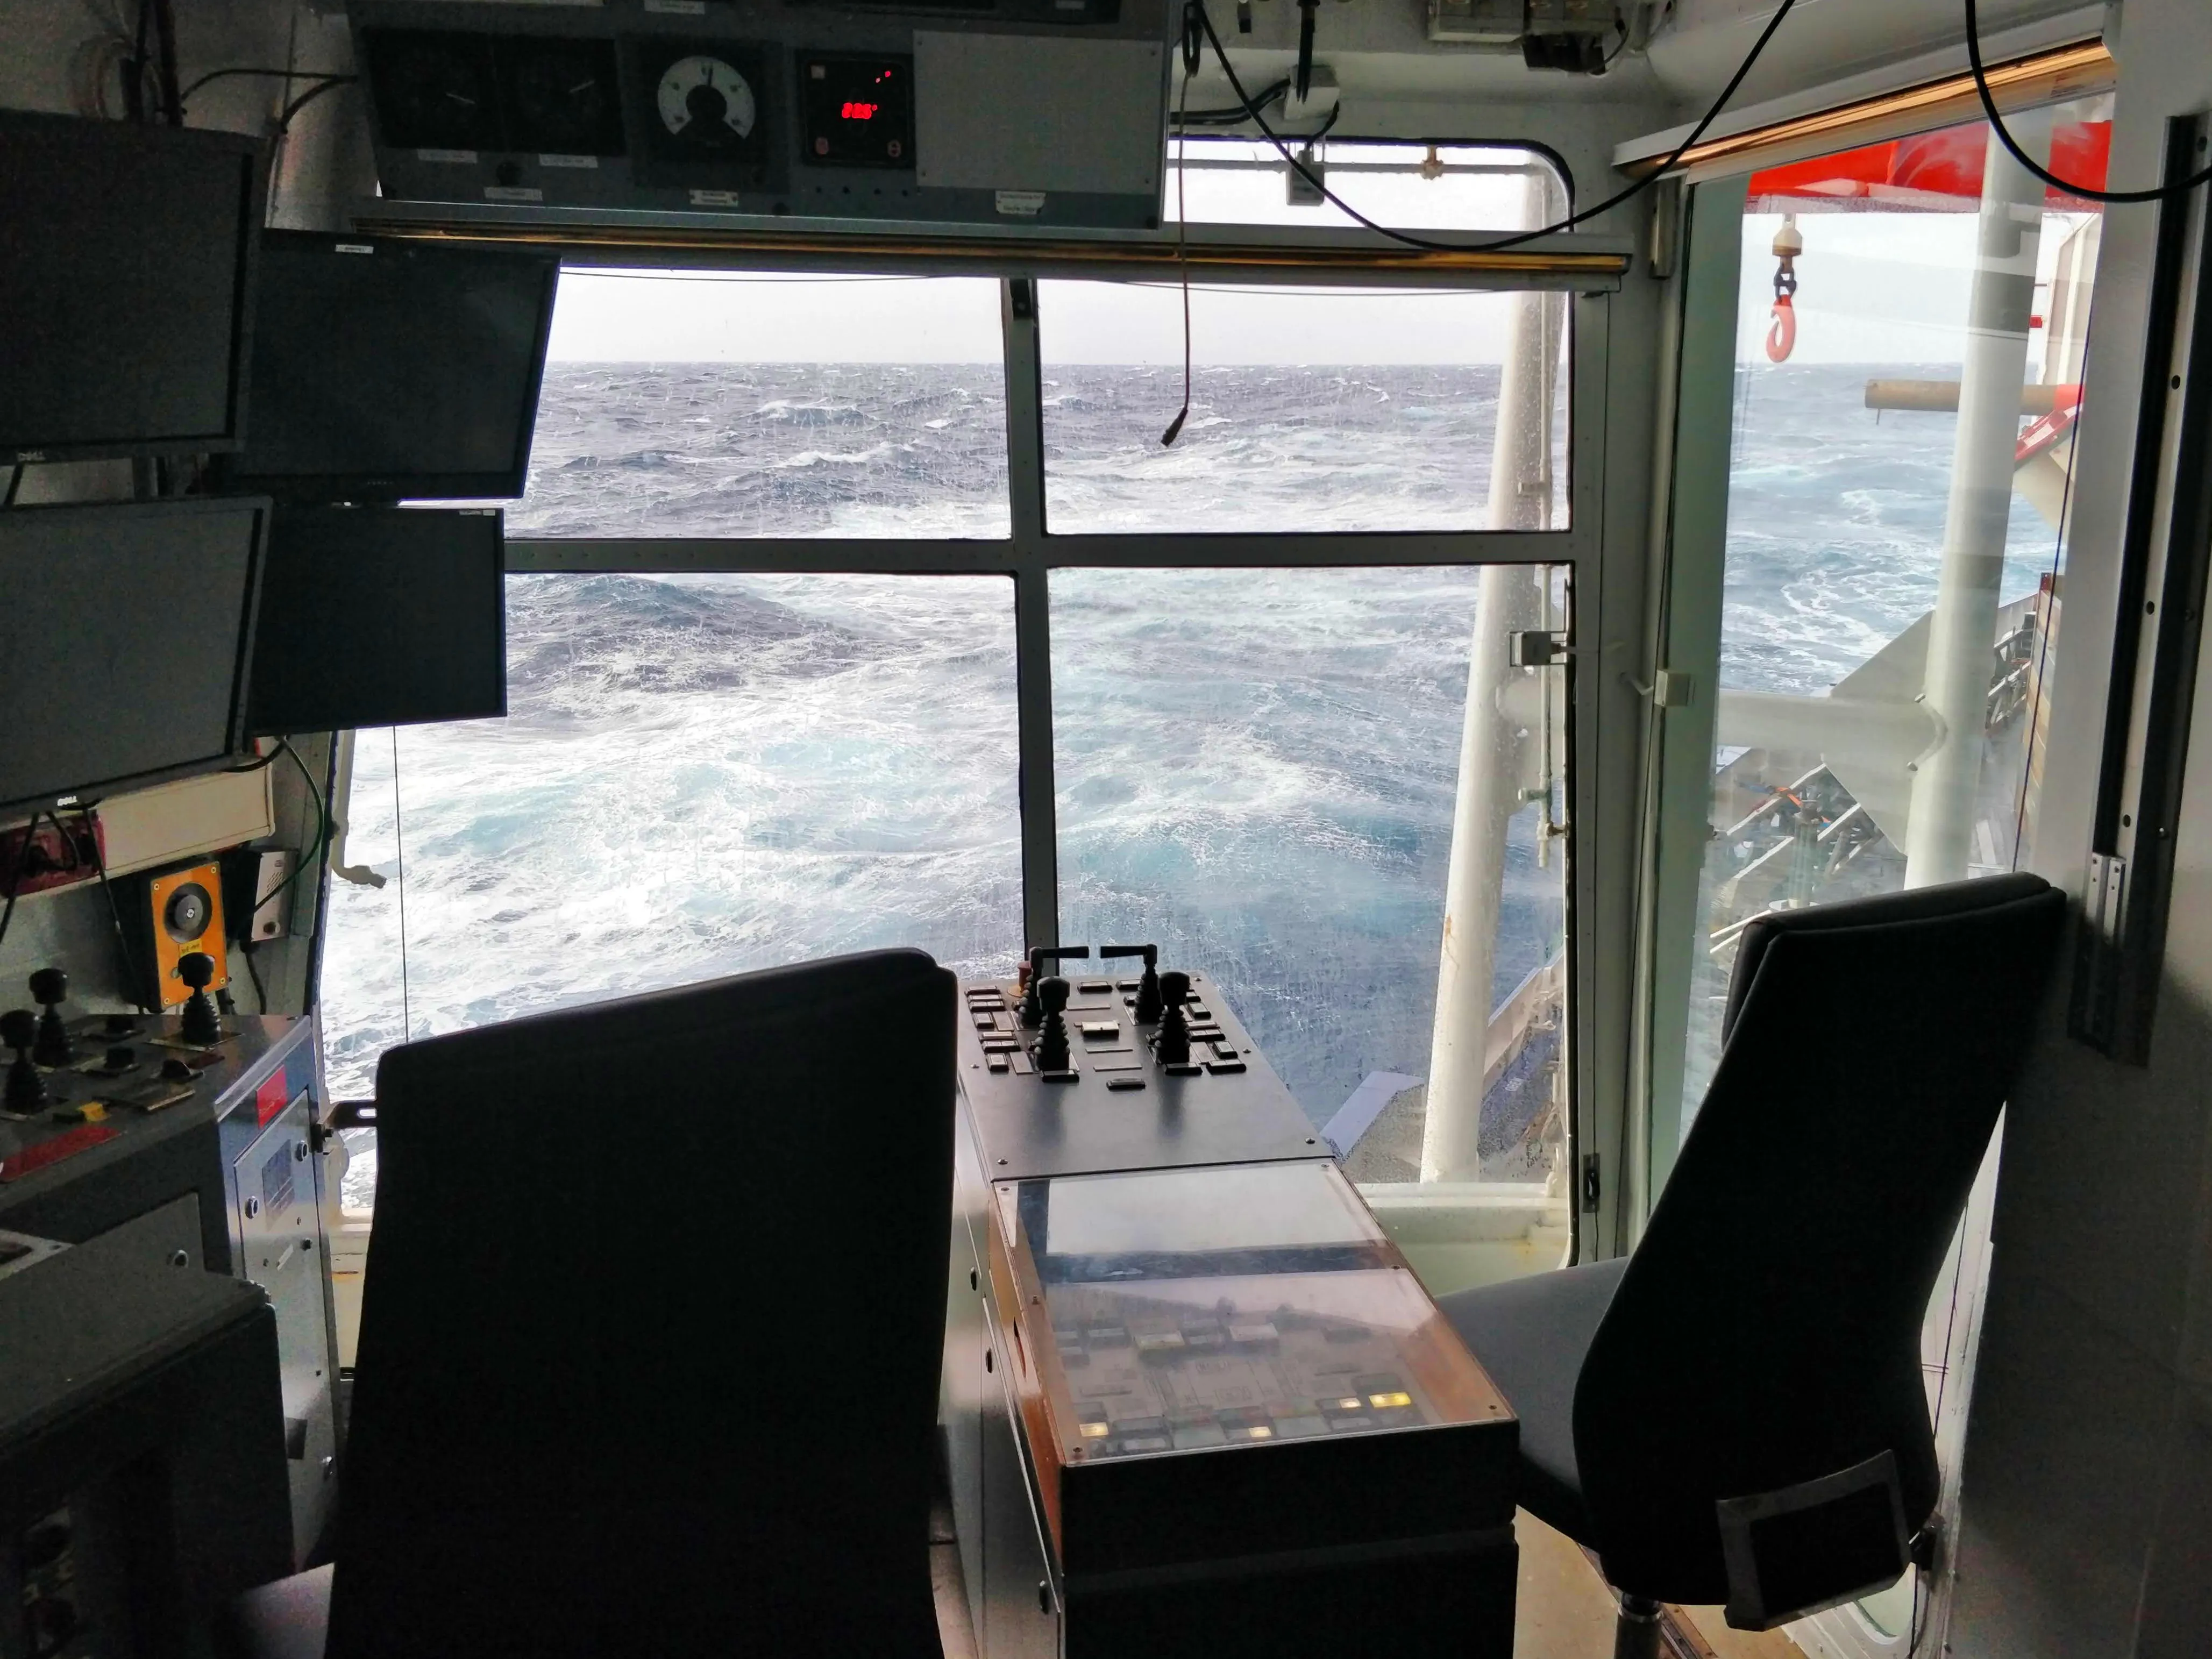 View of the choppy sea through the windows of a cabin with two seats and lots of screens and dials.